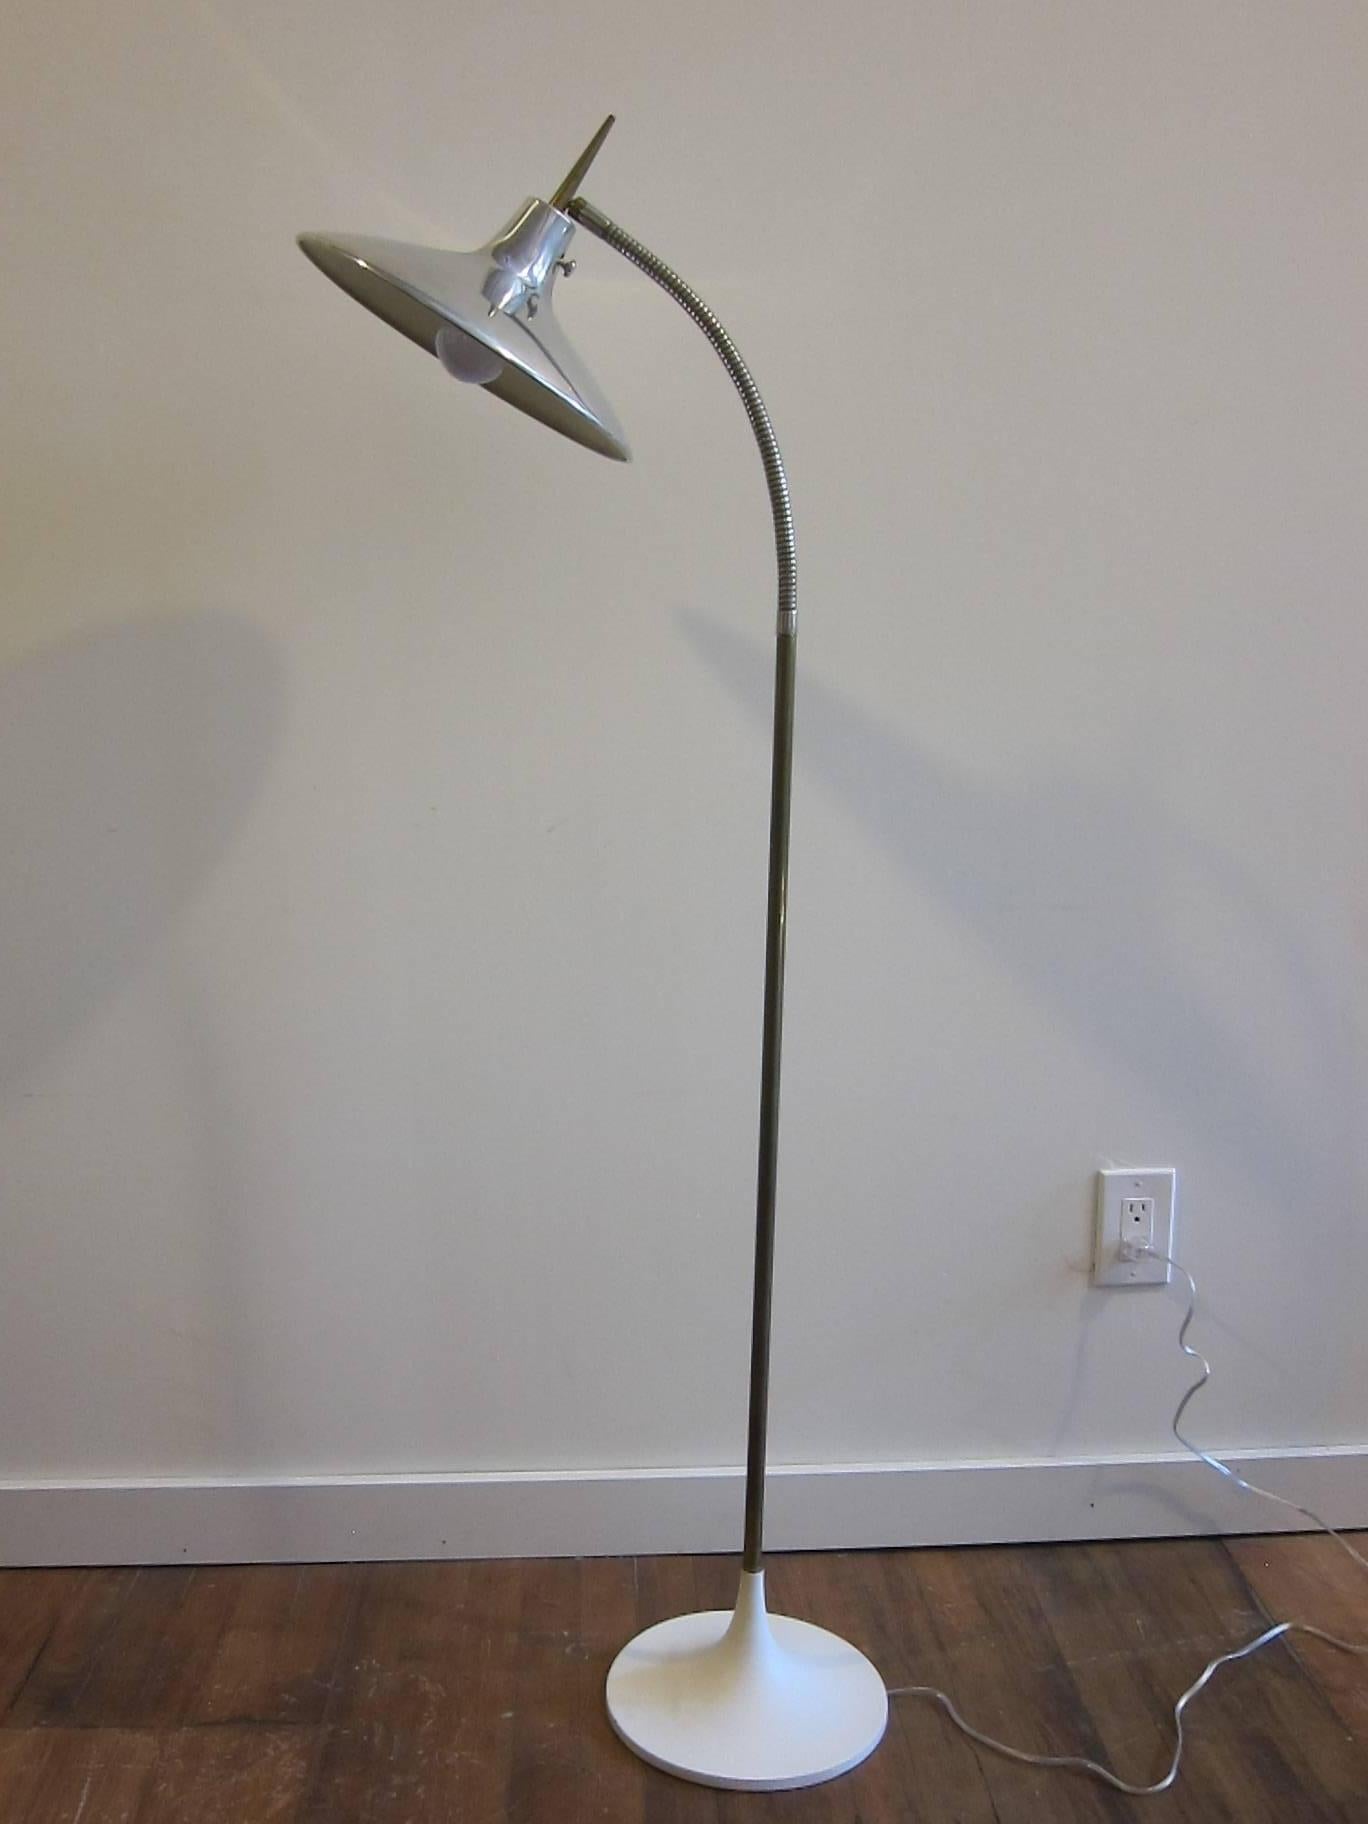 Laurel Floor lamp in the style of  Gio Ponti, model B-683 floor lamp. White base with brass pole, chrome flexible goose neck with chrome shade and brass handle. 
Very good condition. Newly wired.